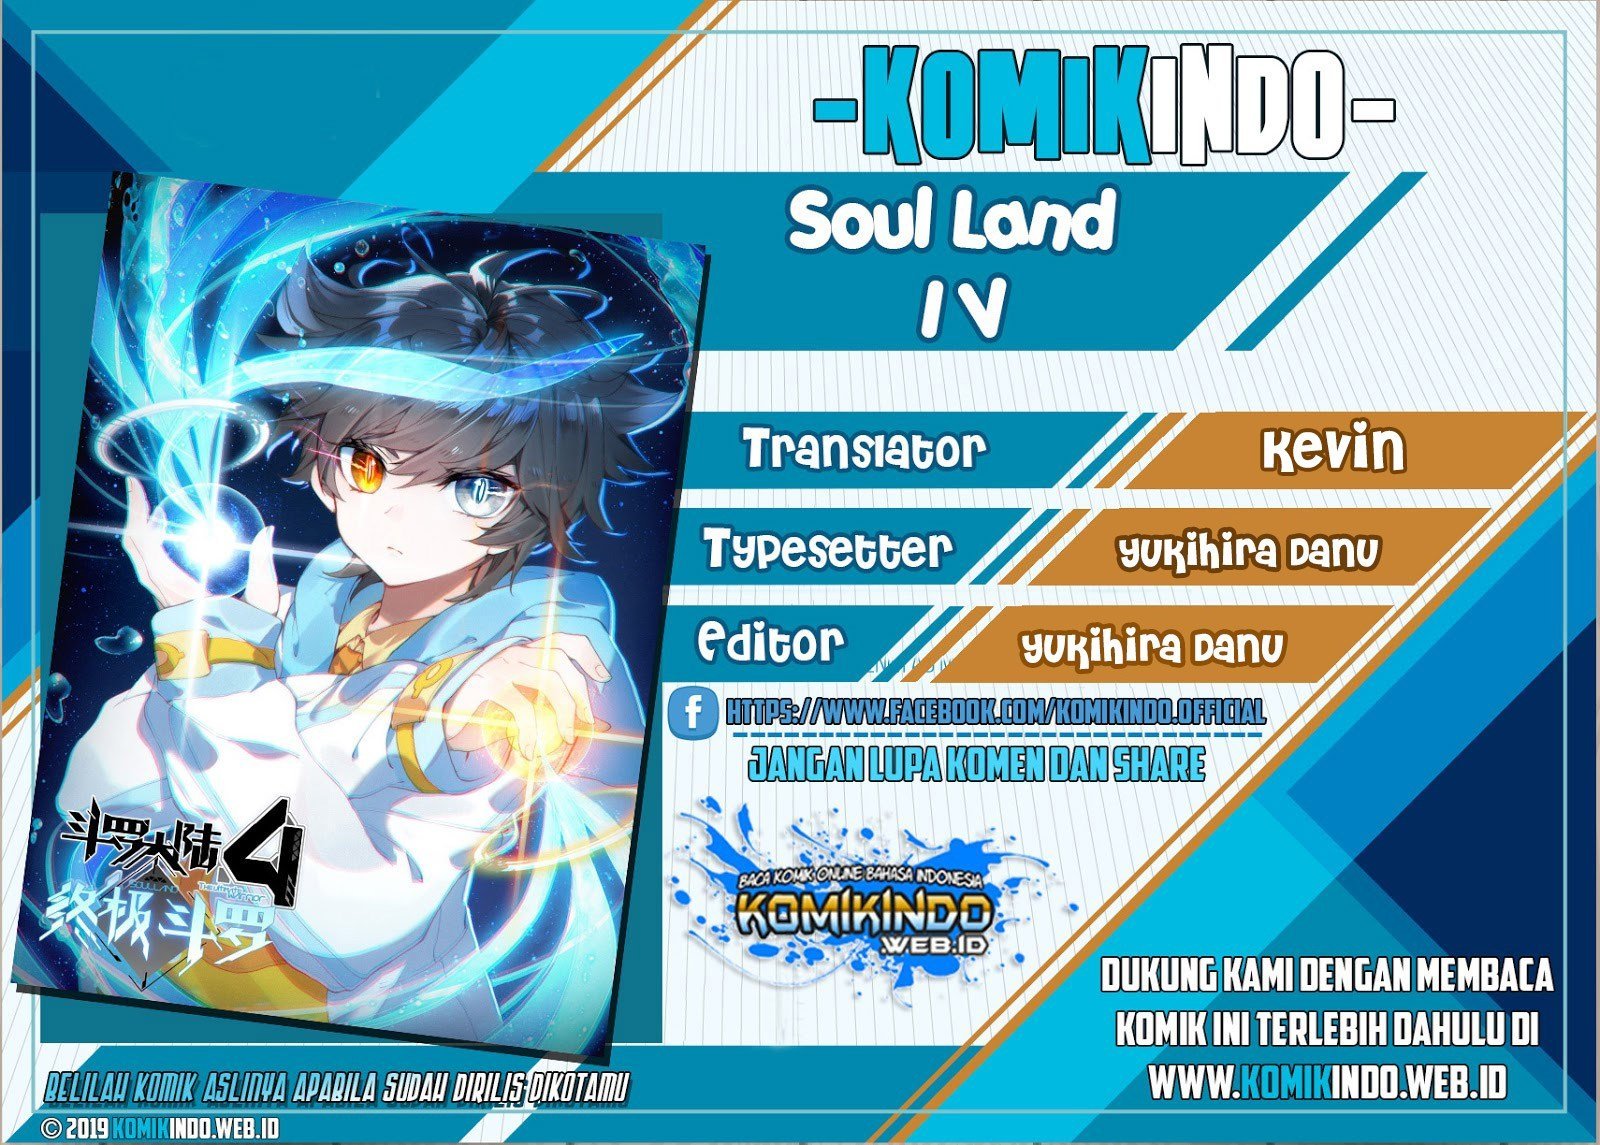 Soul Land IV – The Ultimate Combat Chapter 15.5